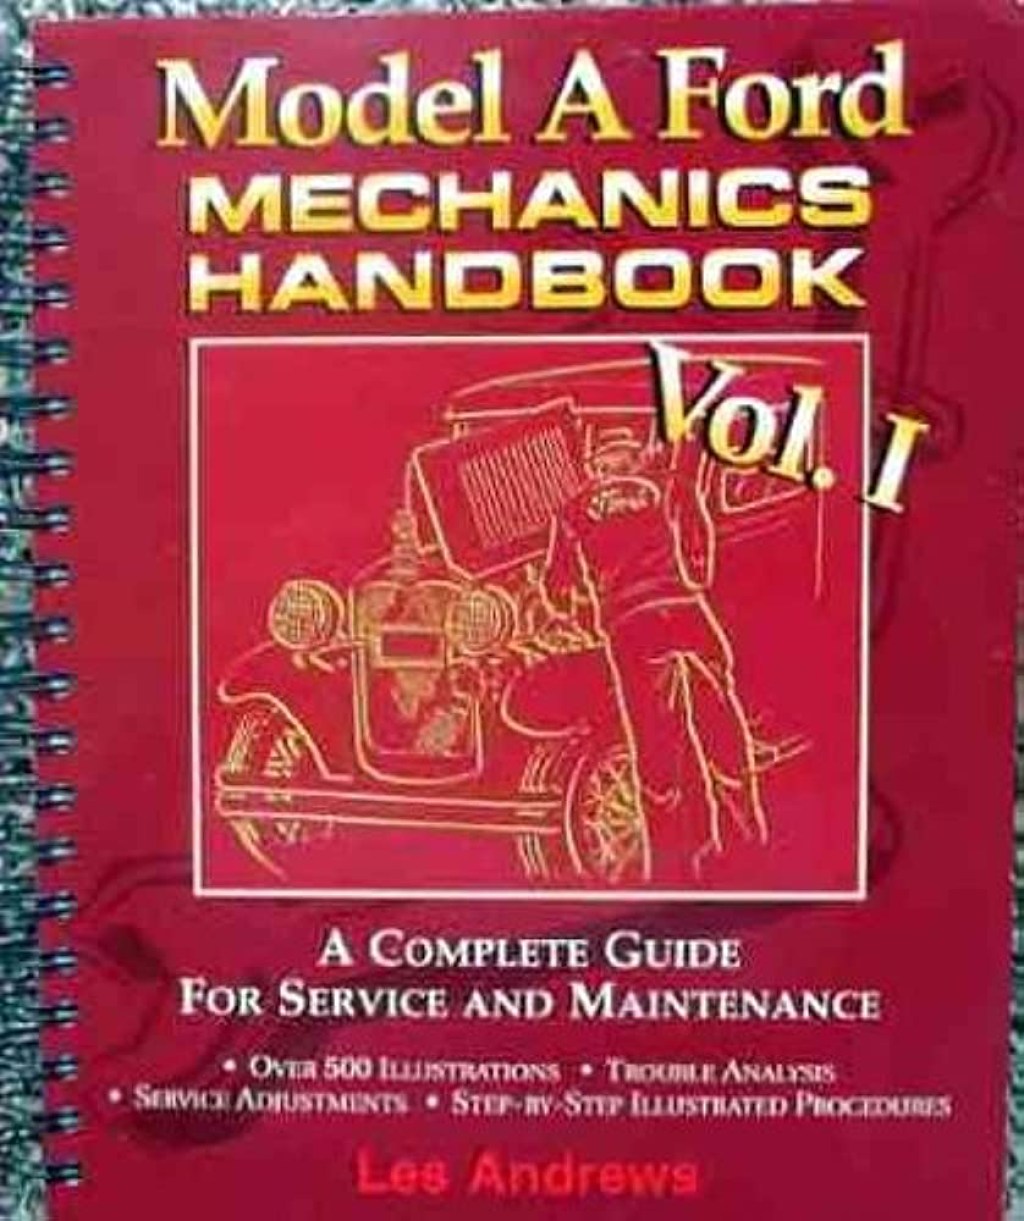 Picture of: Model A Ford mechanics handbook